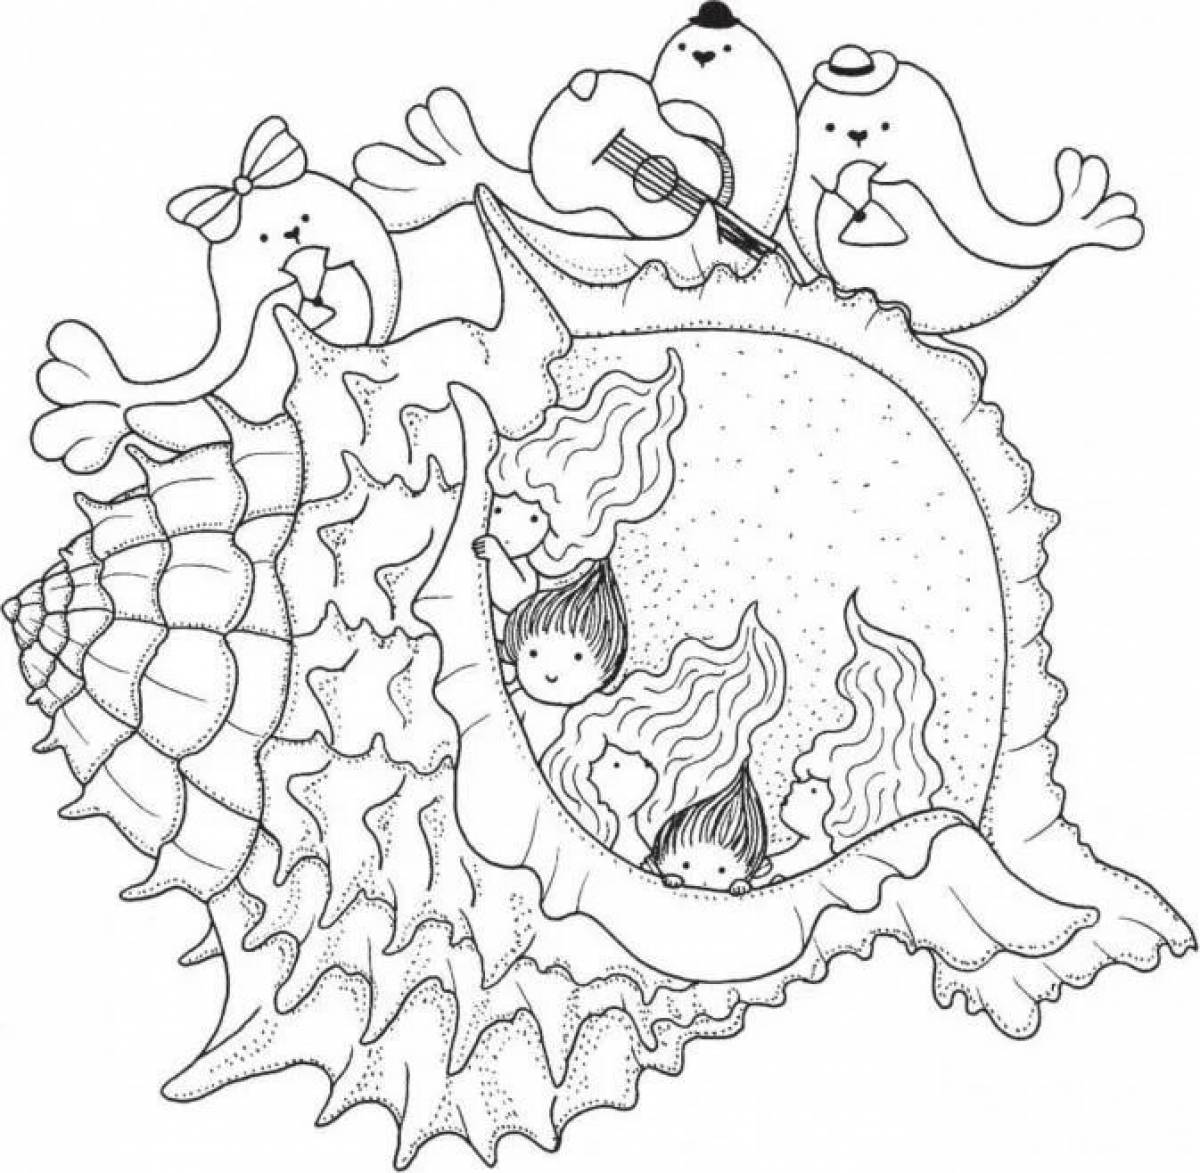 Exquisite mermaid coloring page